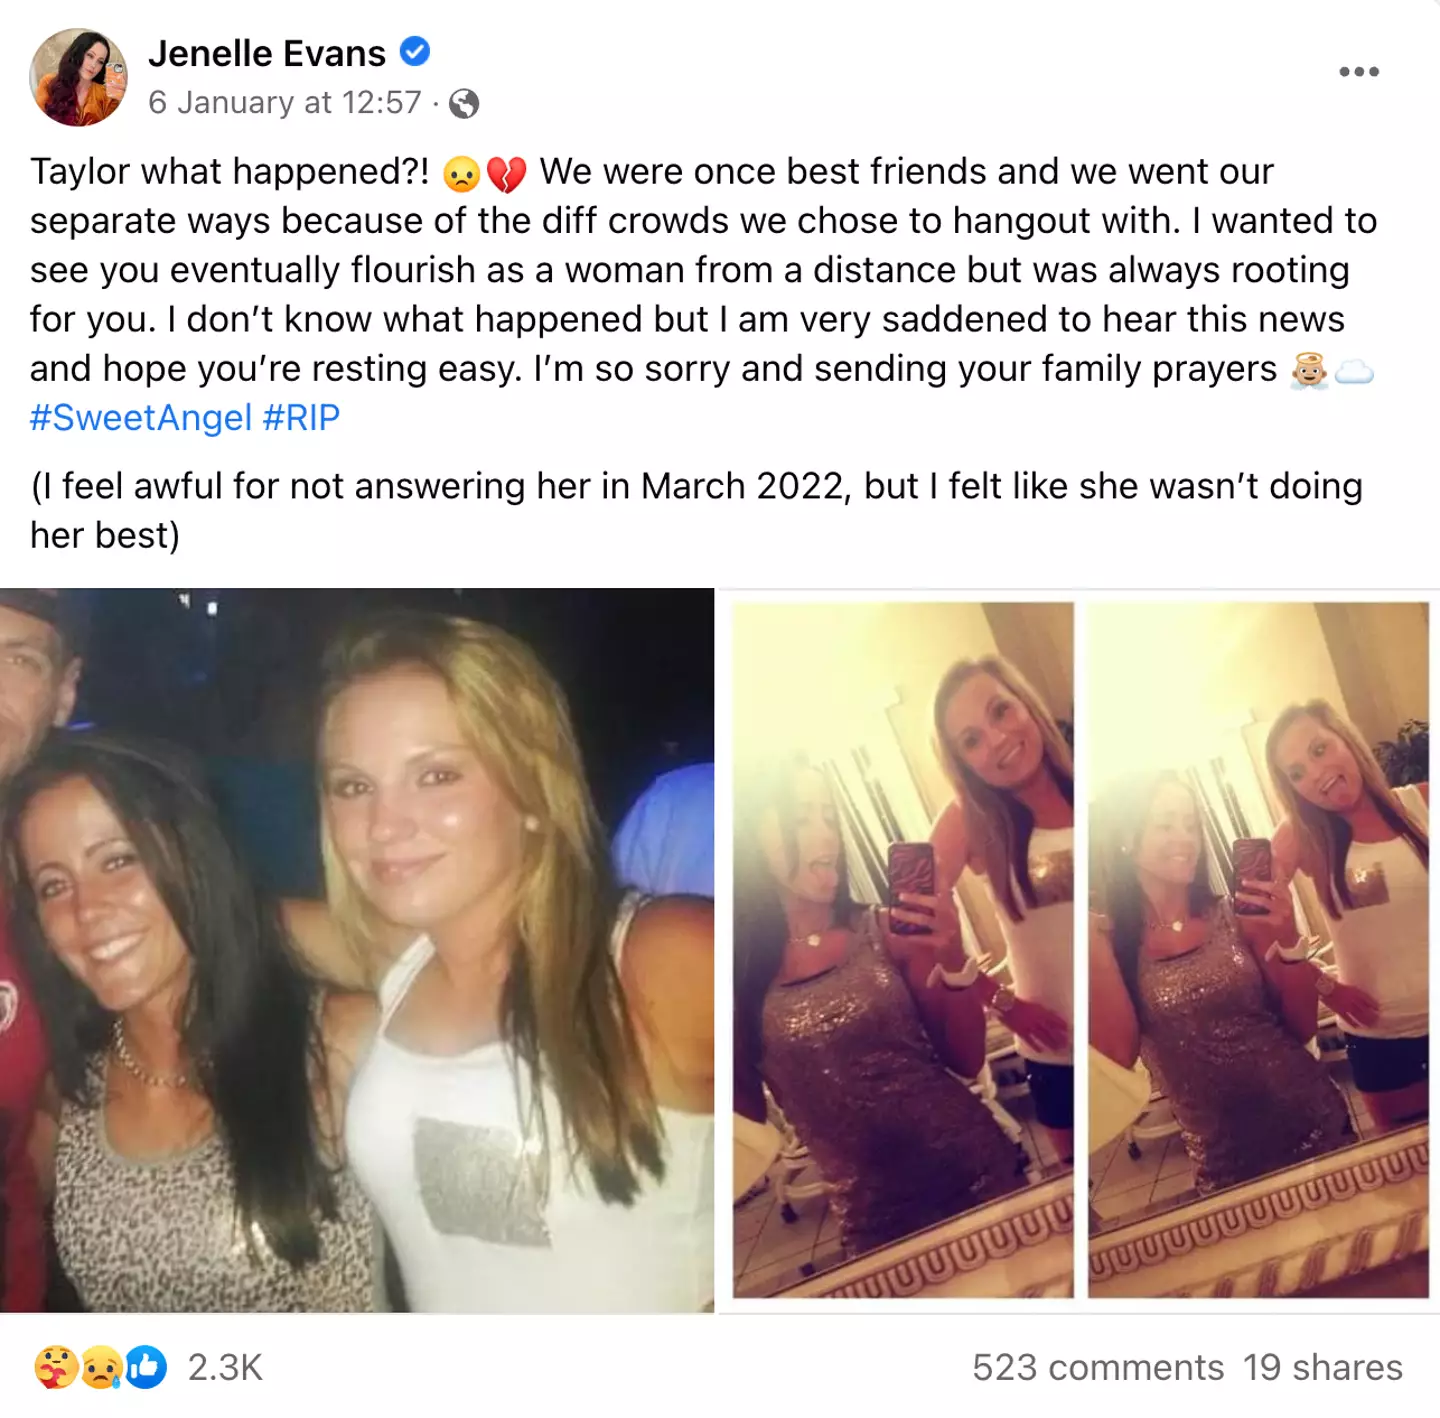 Jenelle paid tribute to her former friend on social media.